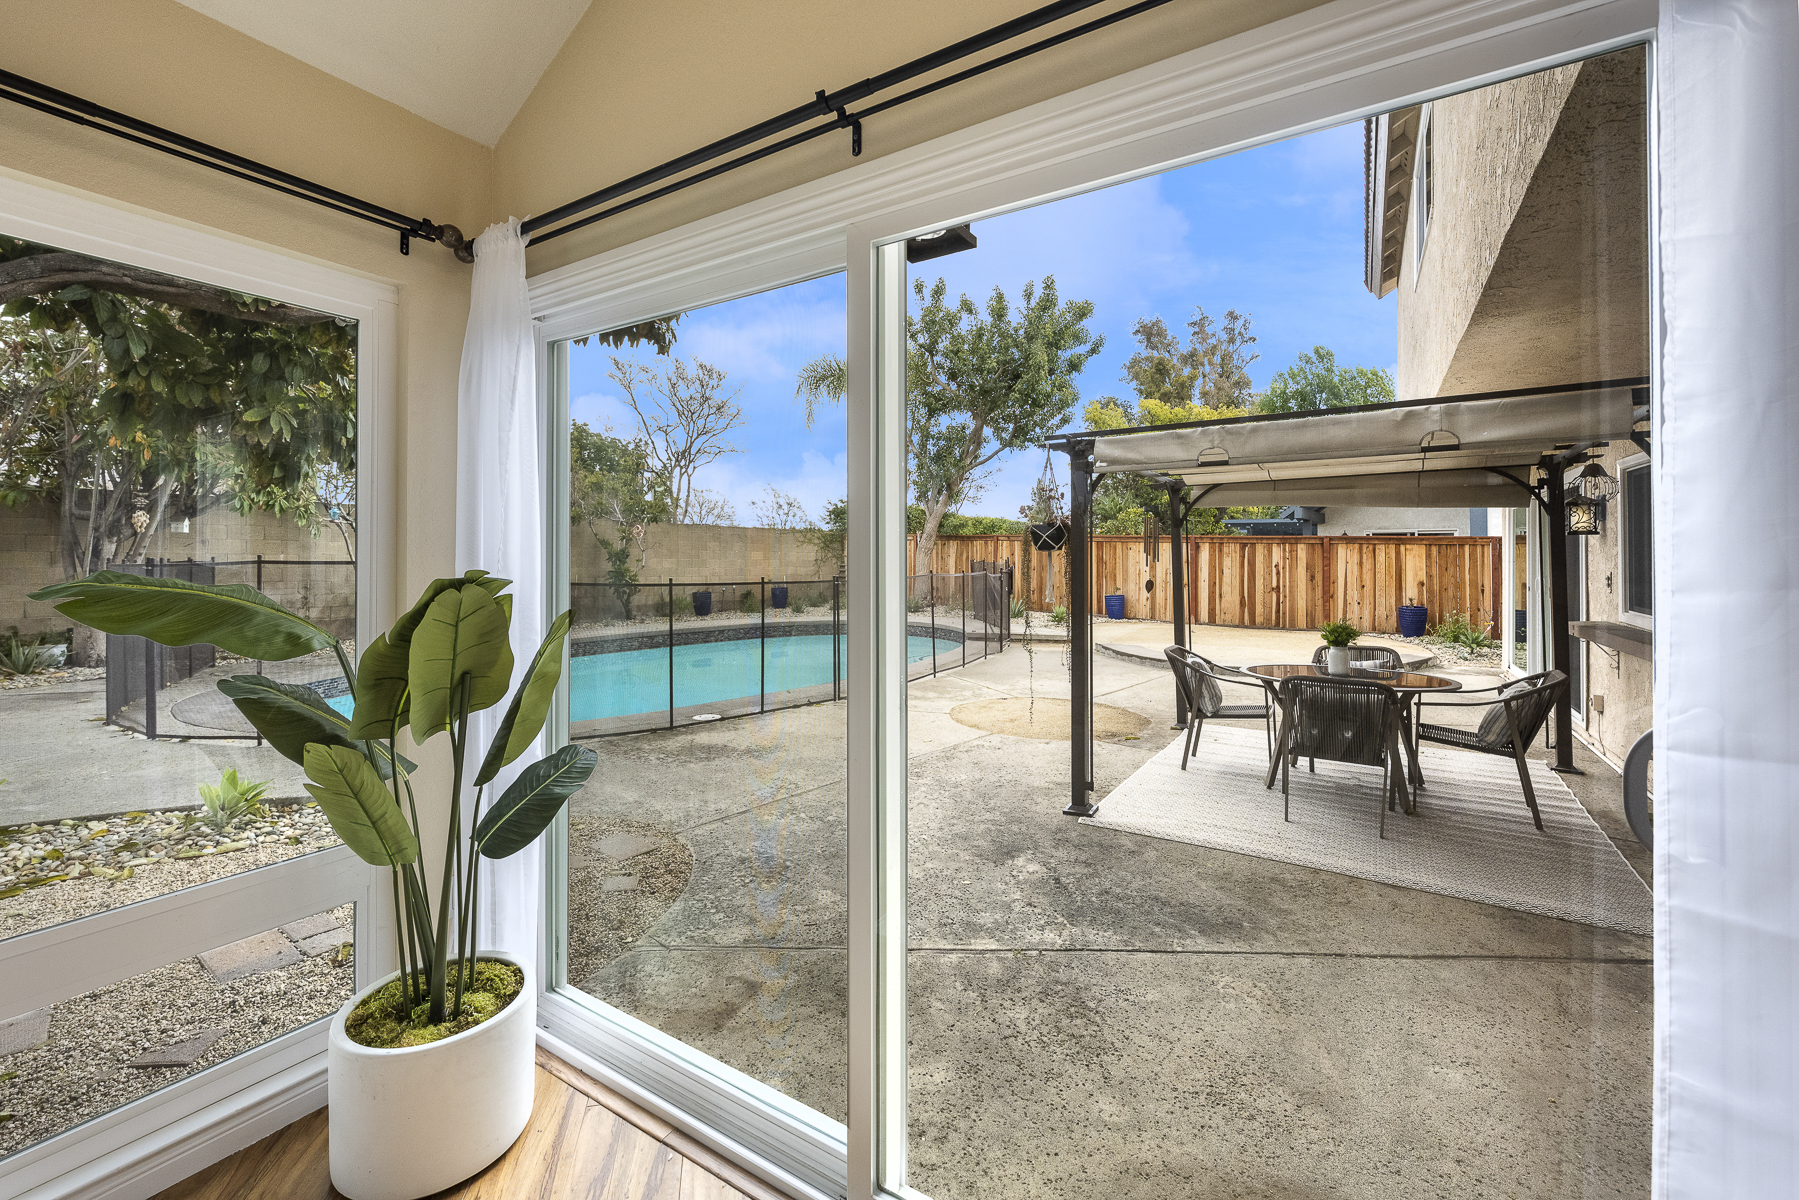 View of backyard pool and sitting area with overhang through corner glass windows